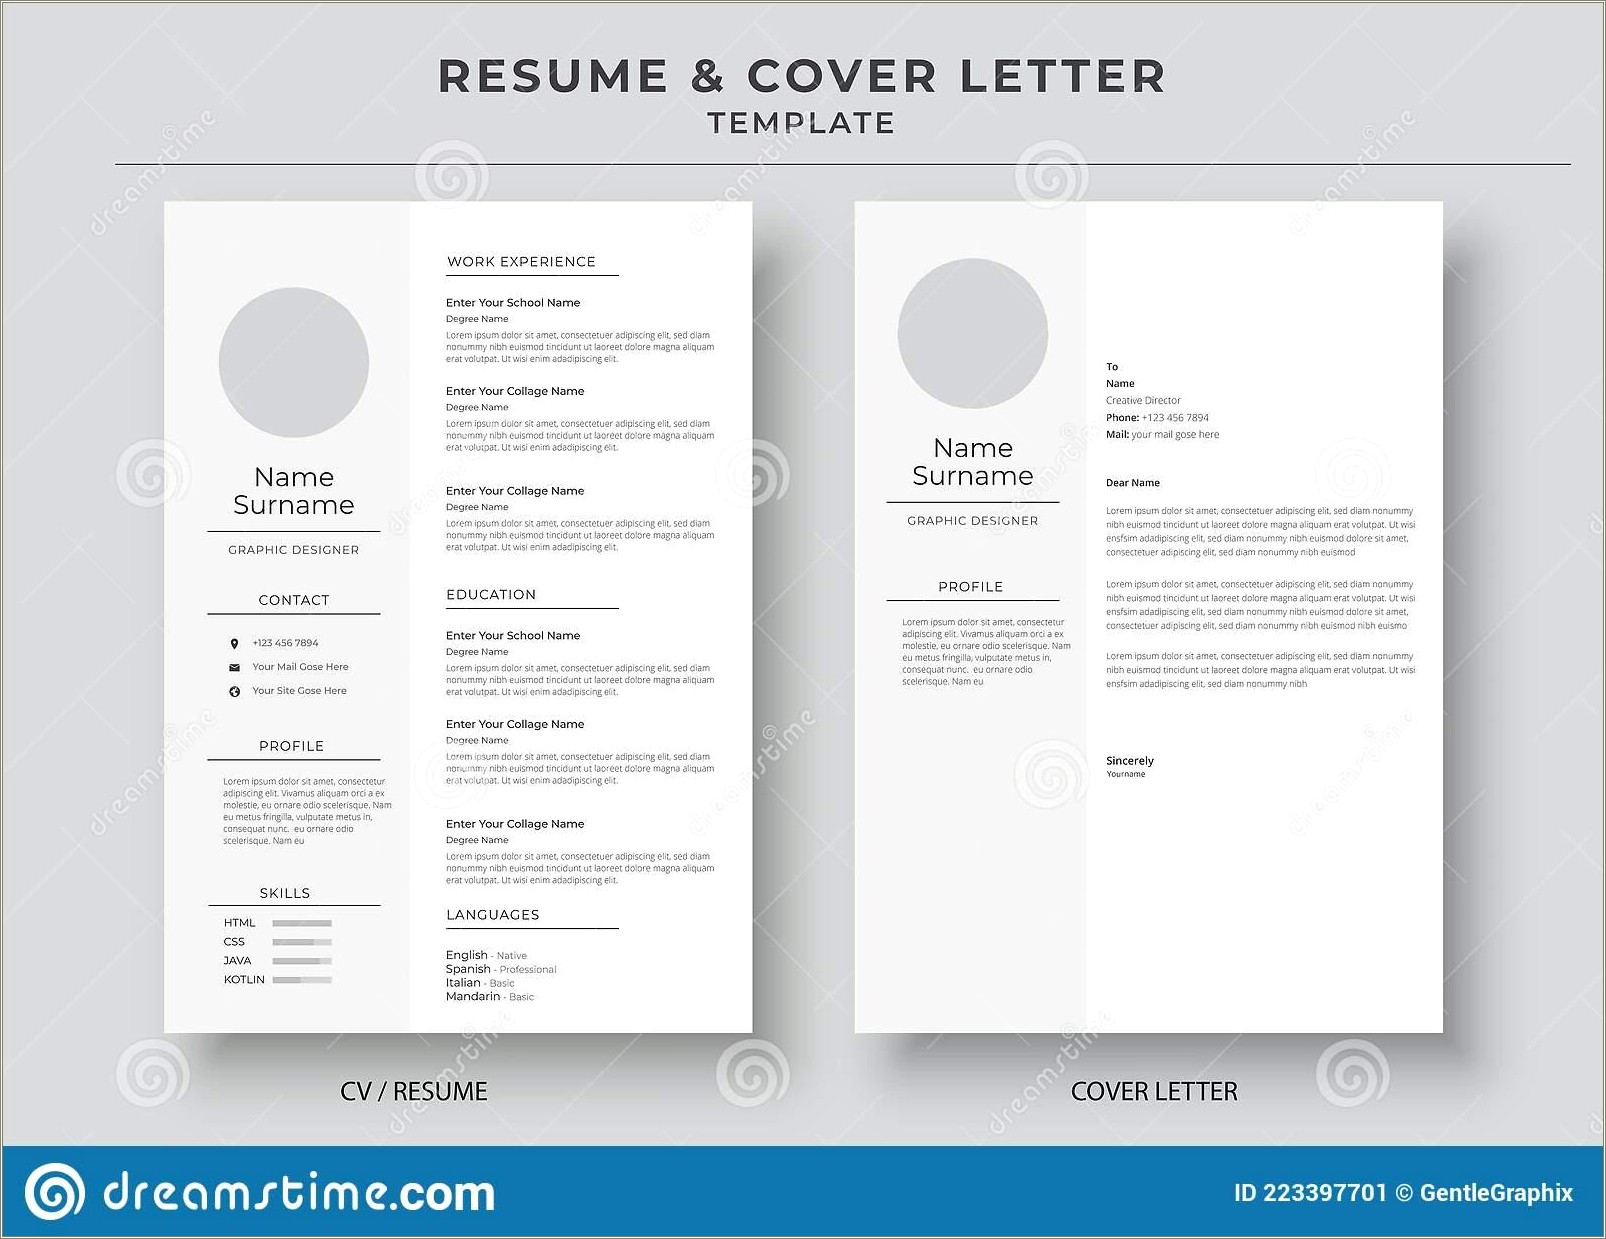 Font To Use For Resume And Cover Letter